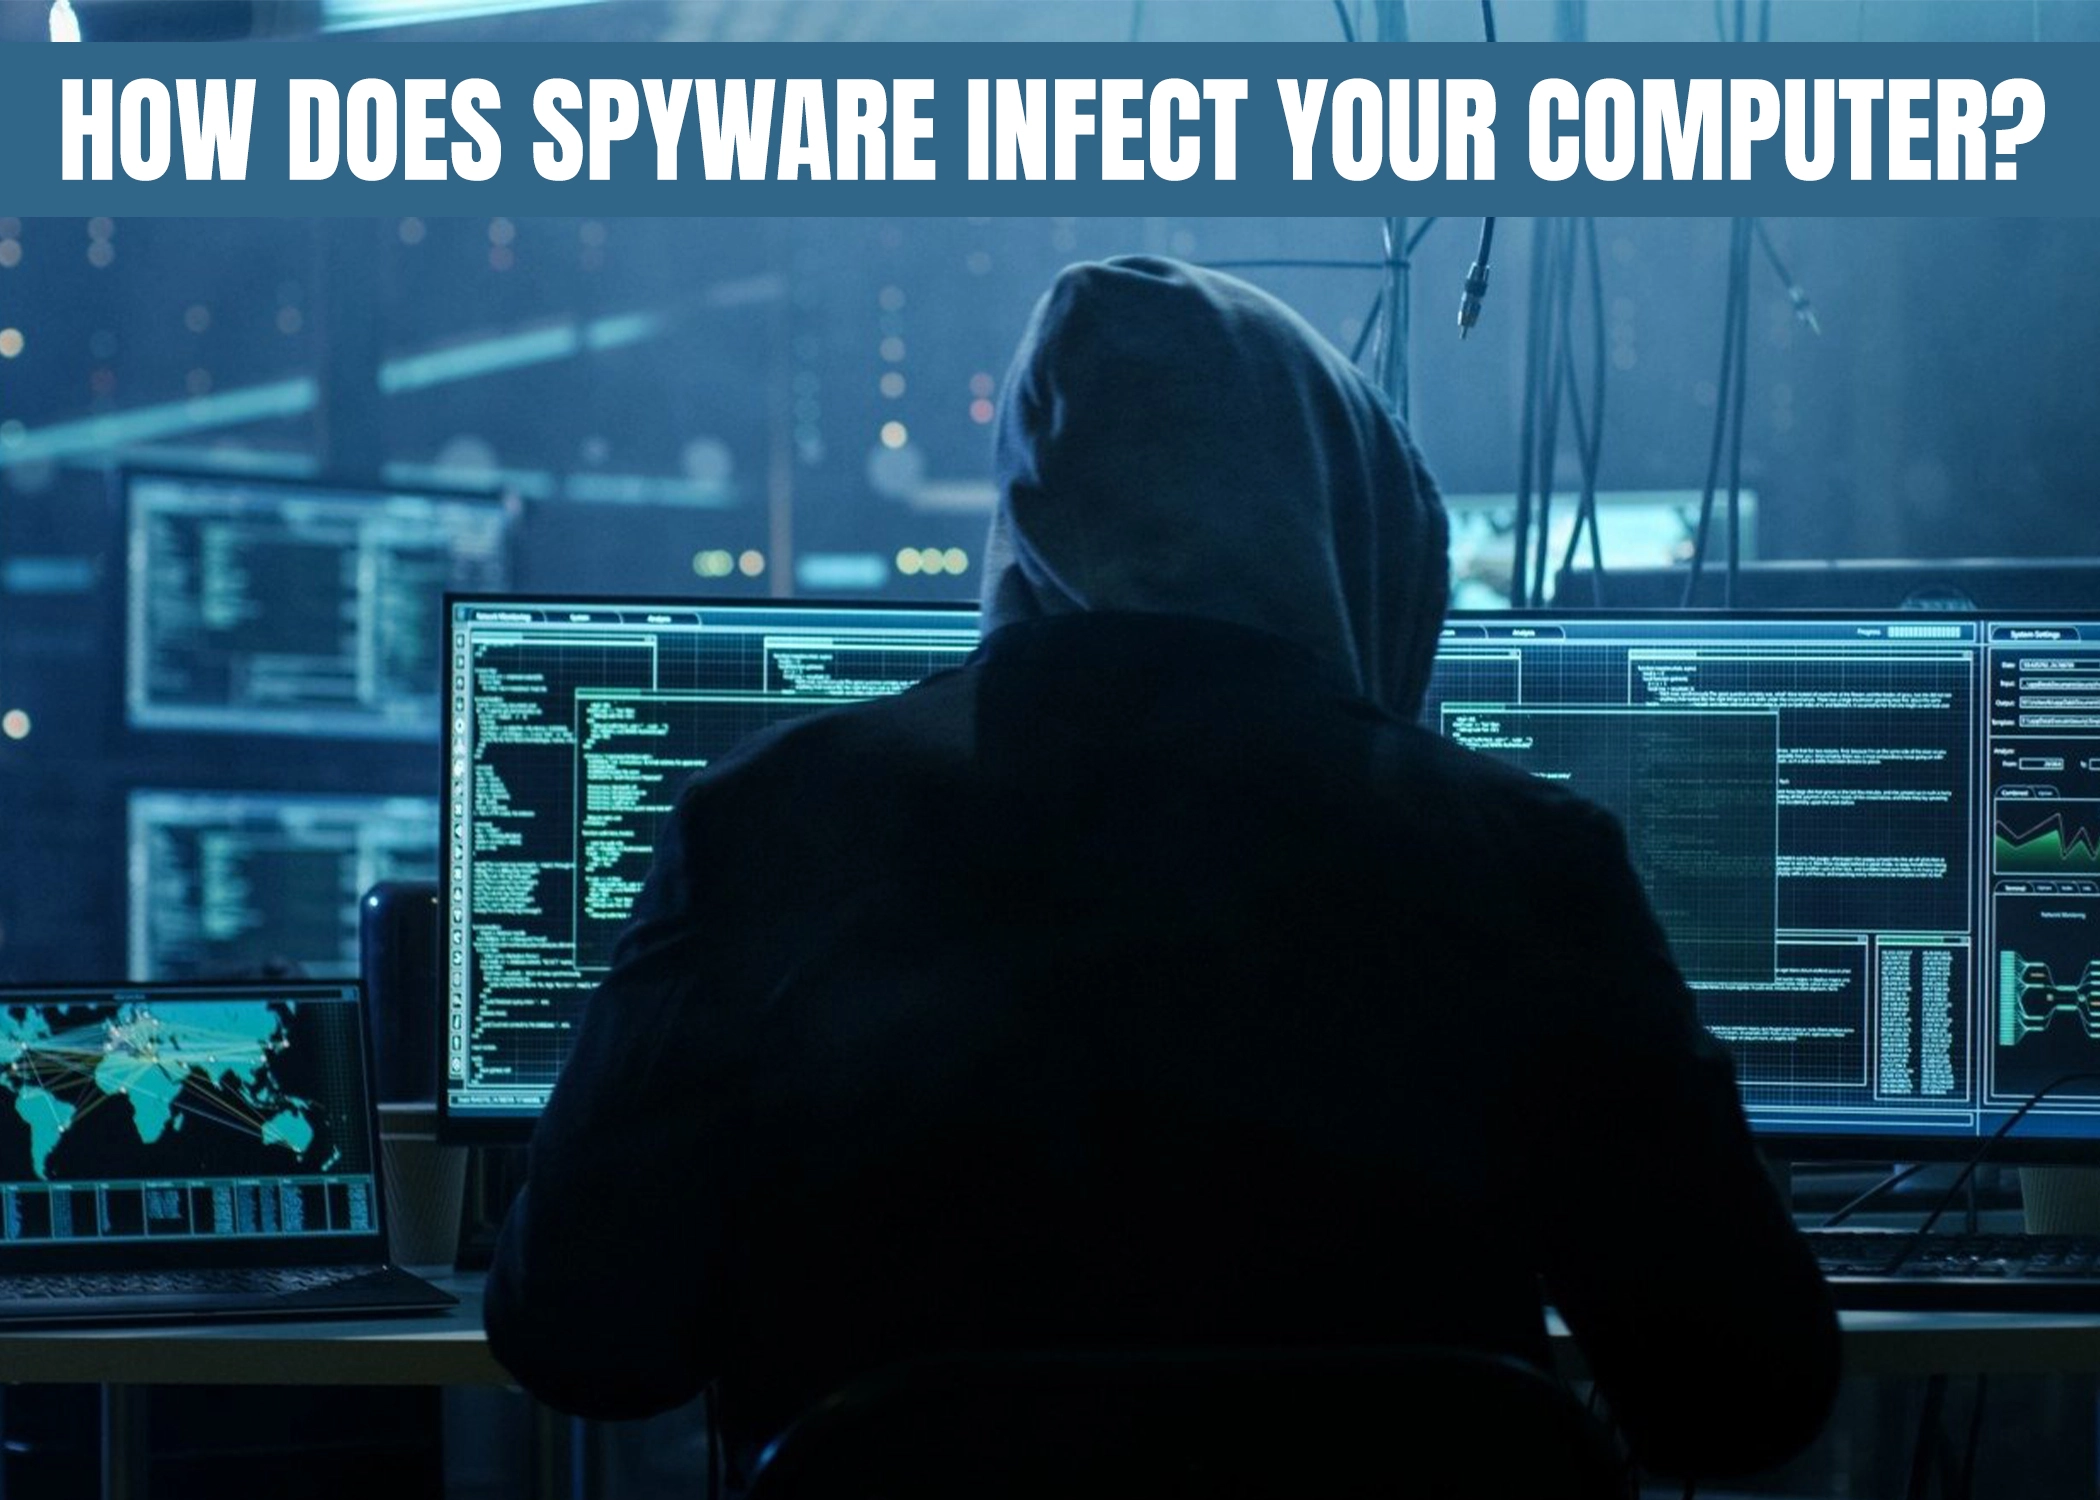 How Does Spyware Infect Your Computer